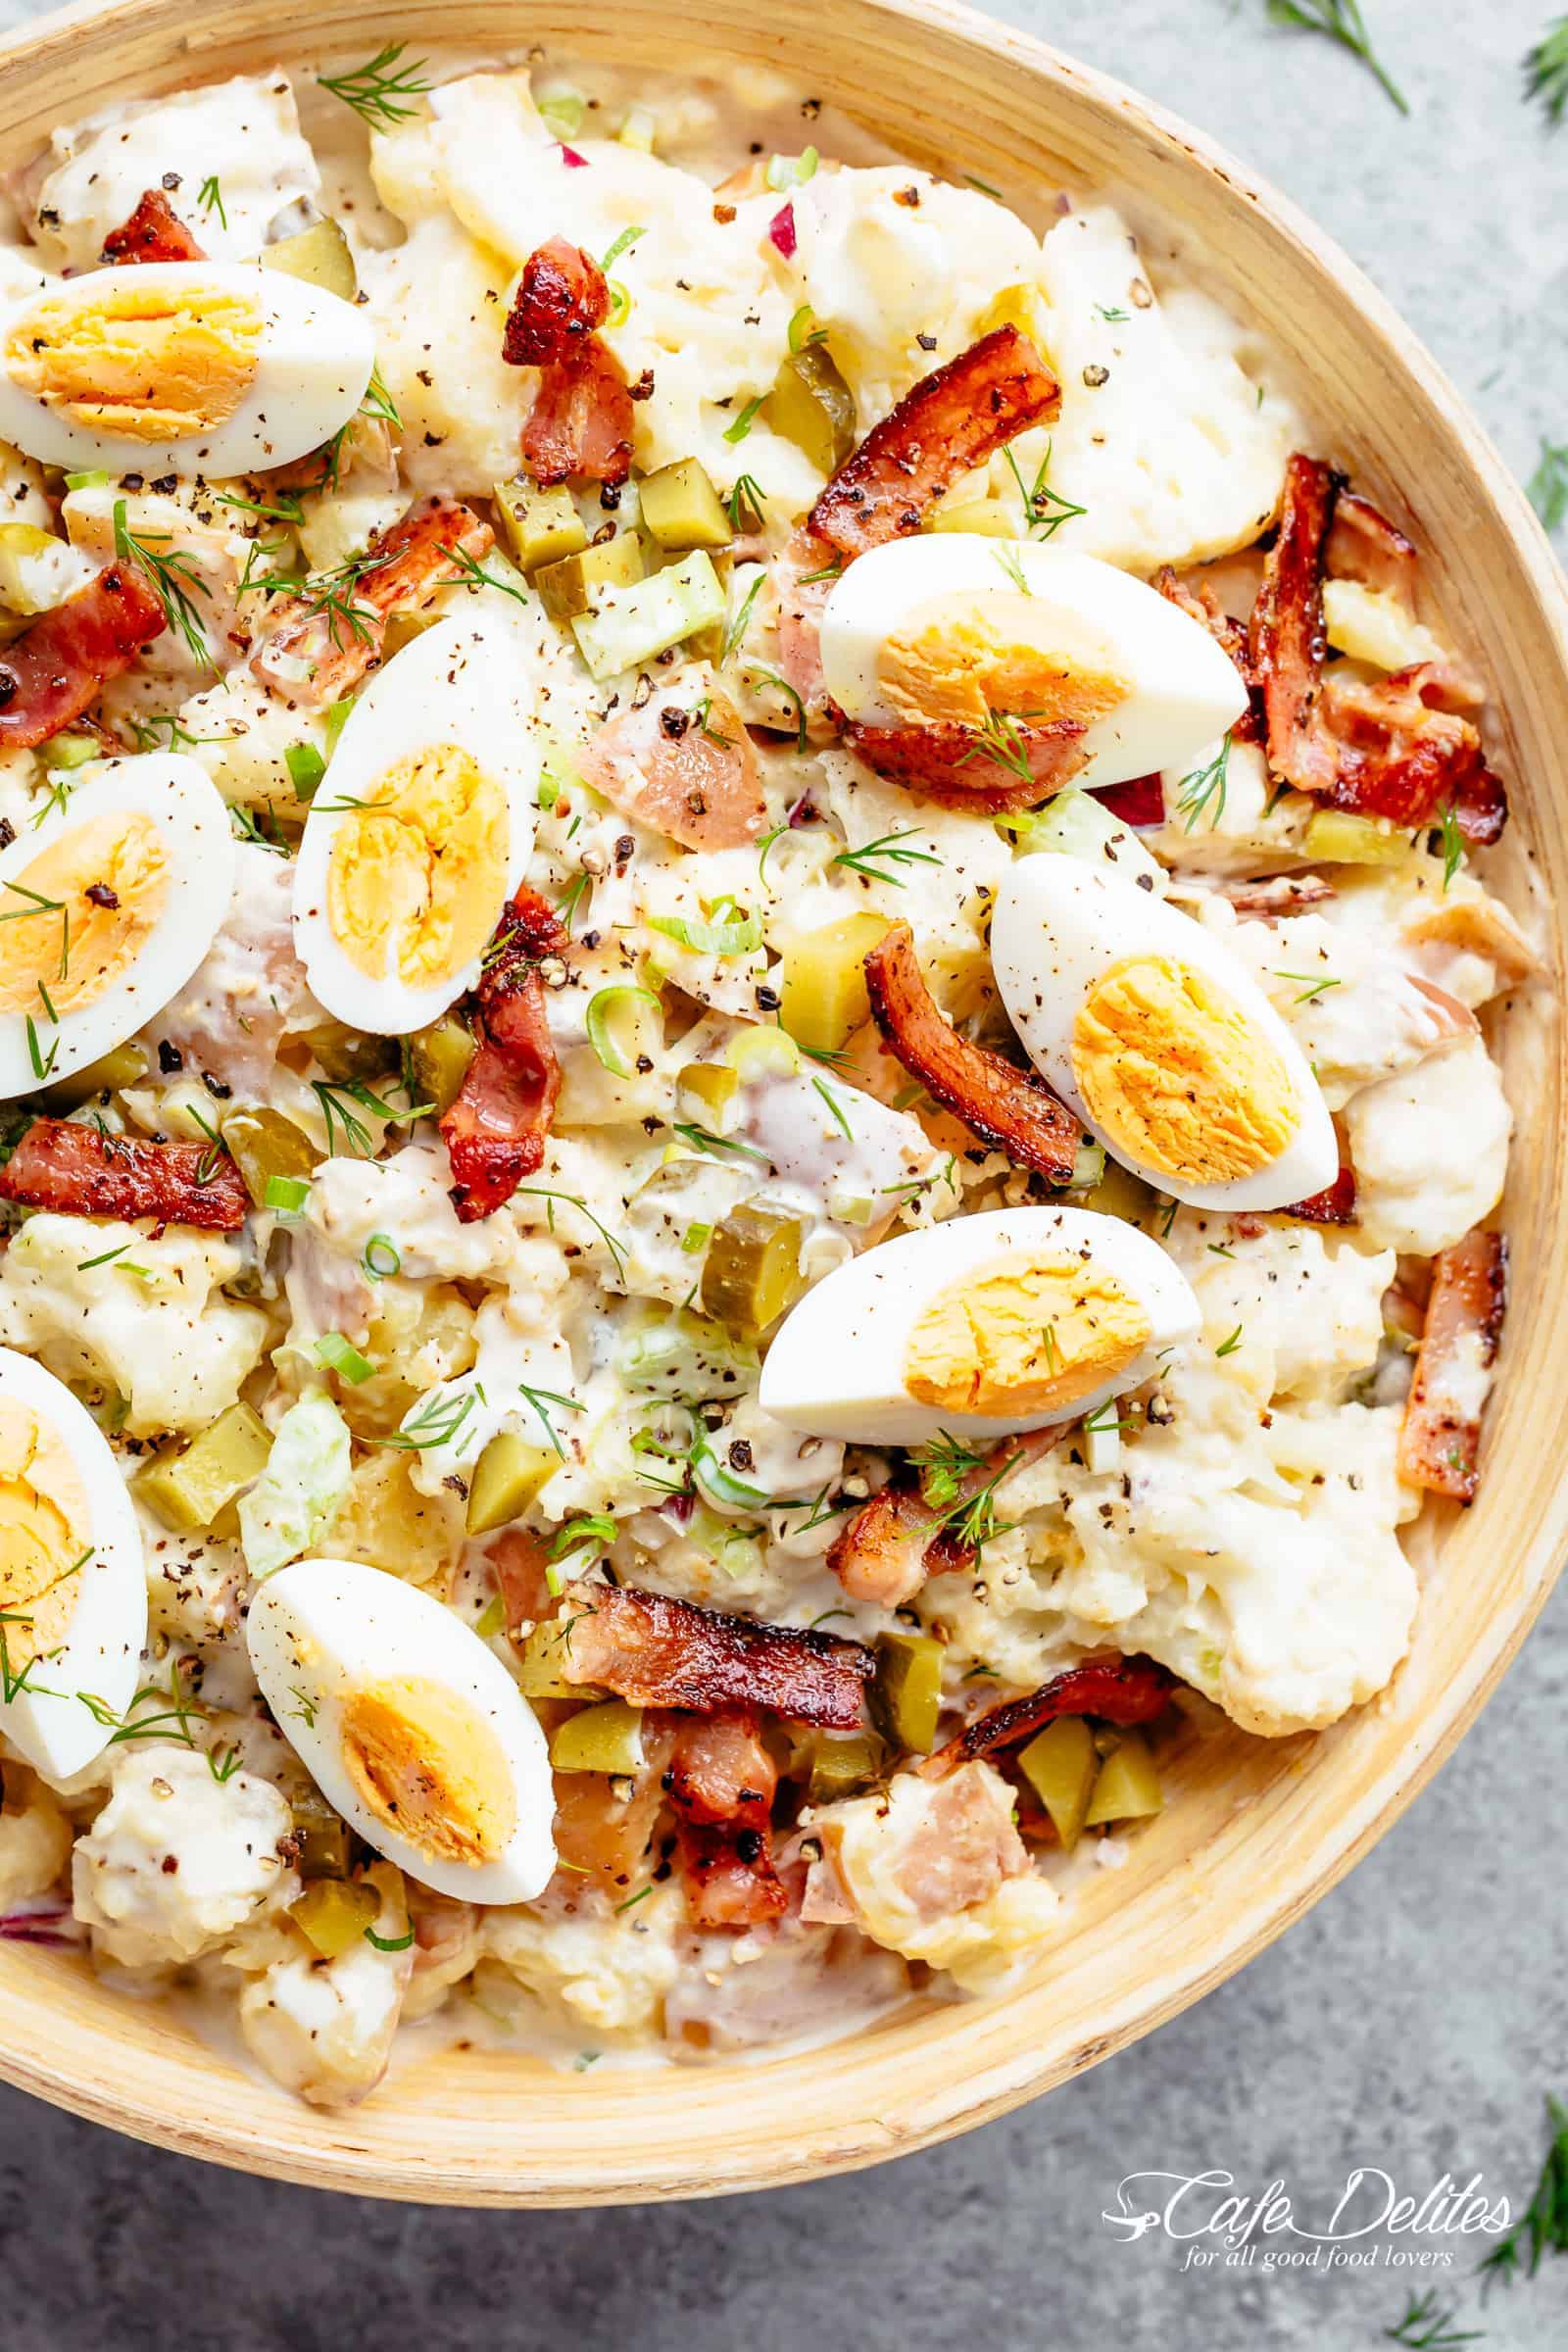 Potato Salad with Bacon, Dill Pickles, Eggs AND a creamy mayo/sour cream dressing! | cafedelites.com